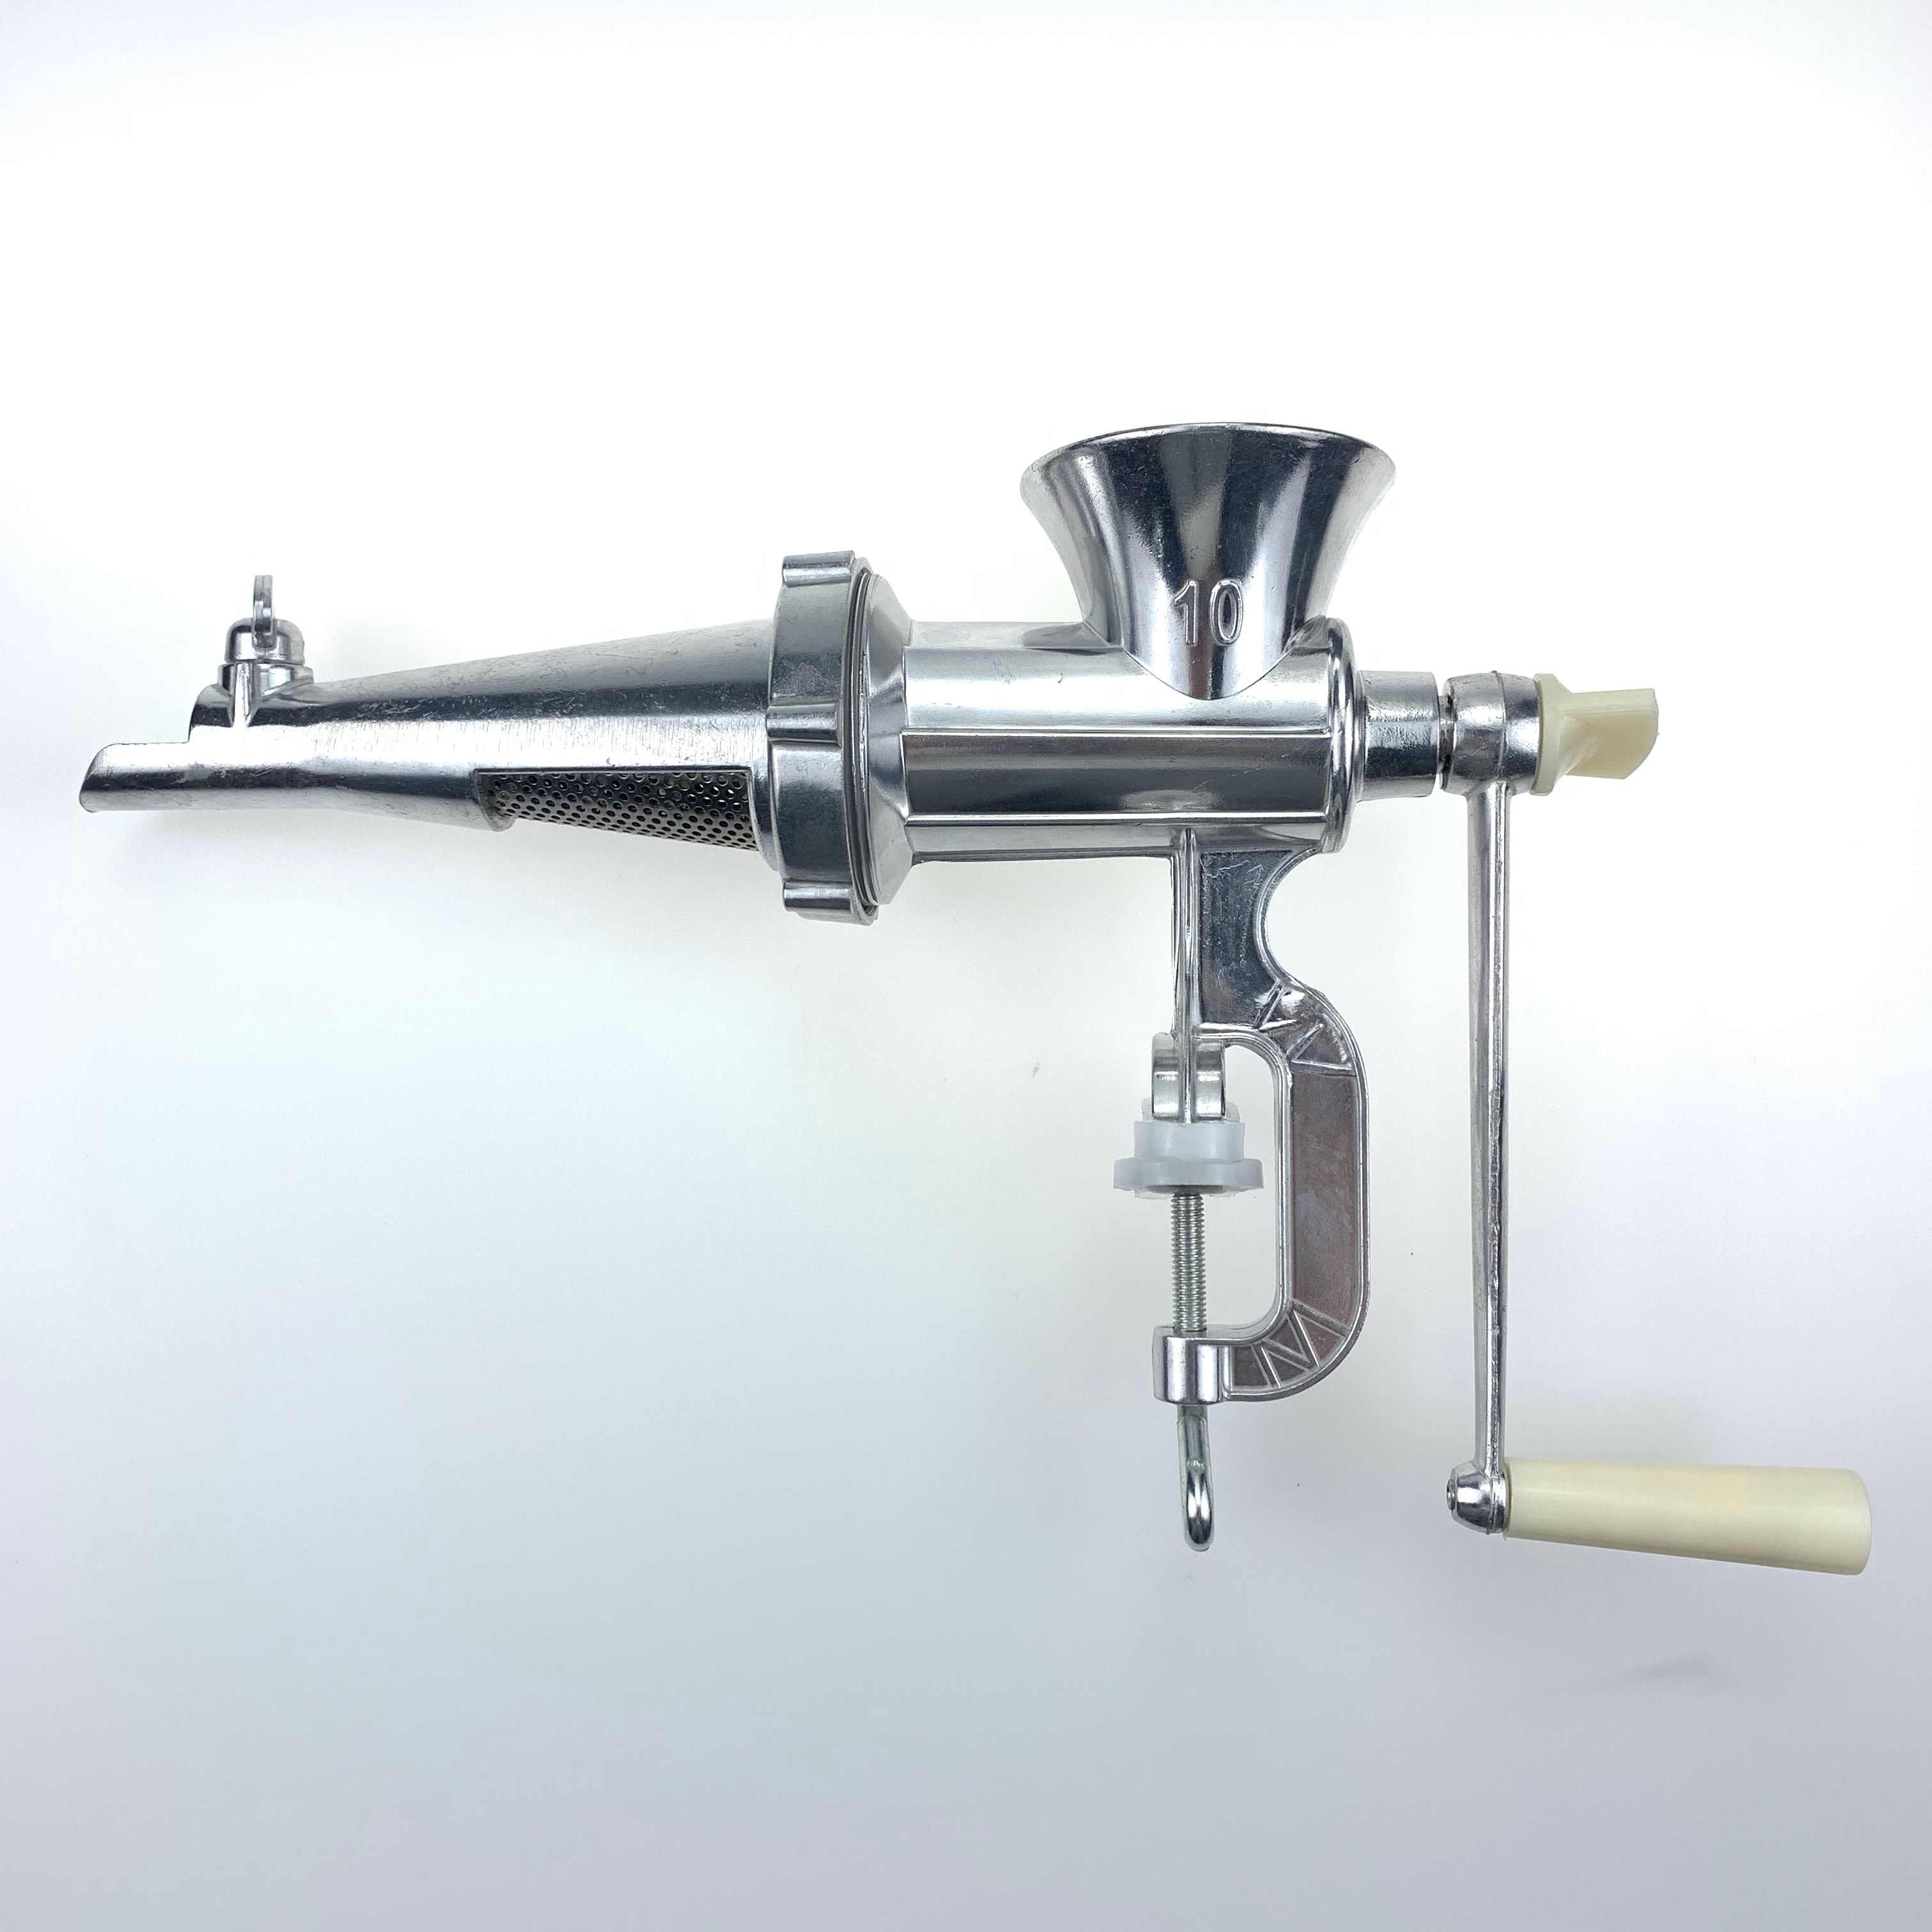 2 In 1 Household Hand Operated Juicer Food Meat Grinder Manual Juice Squeezer Press Extractor Meat Fruit Vegetable Wheatgrass